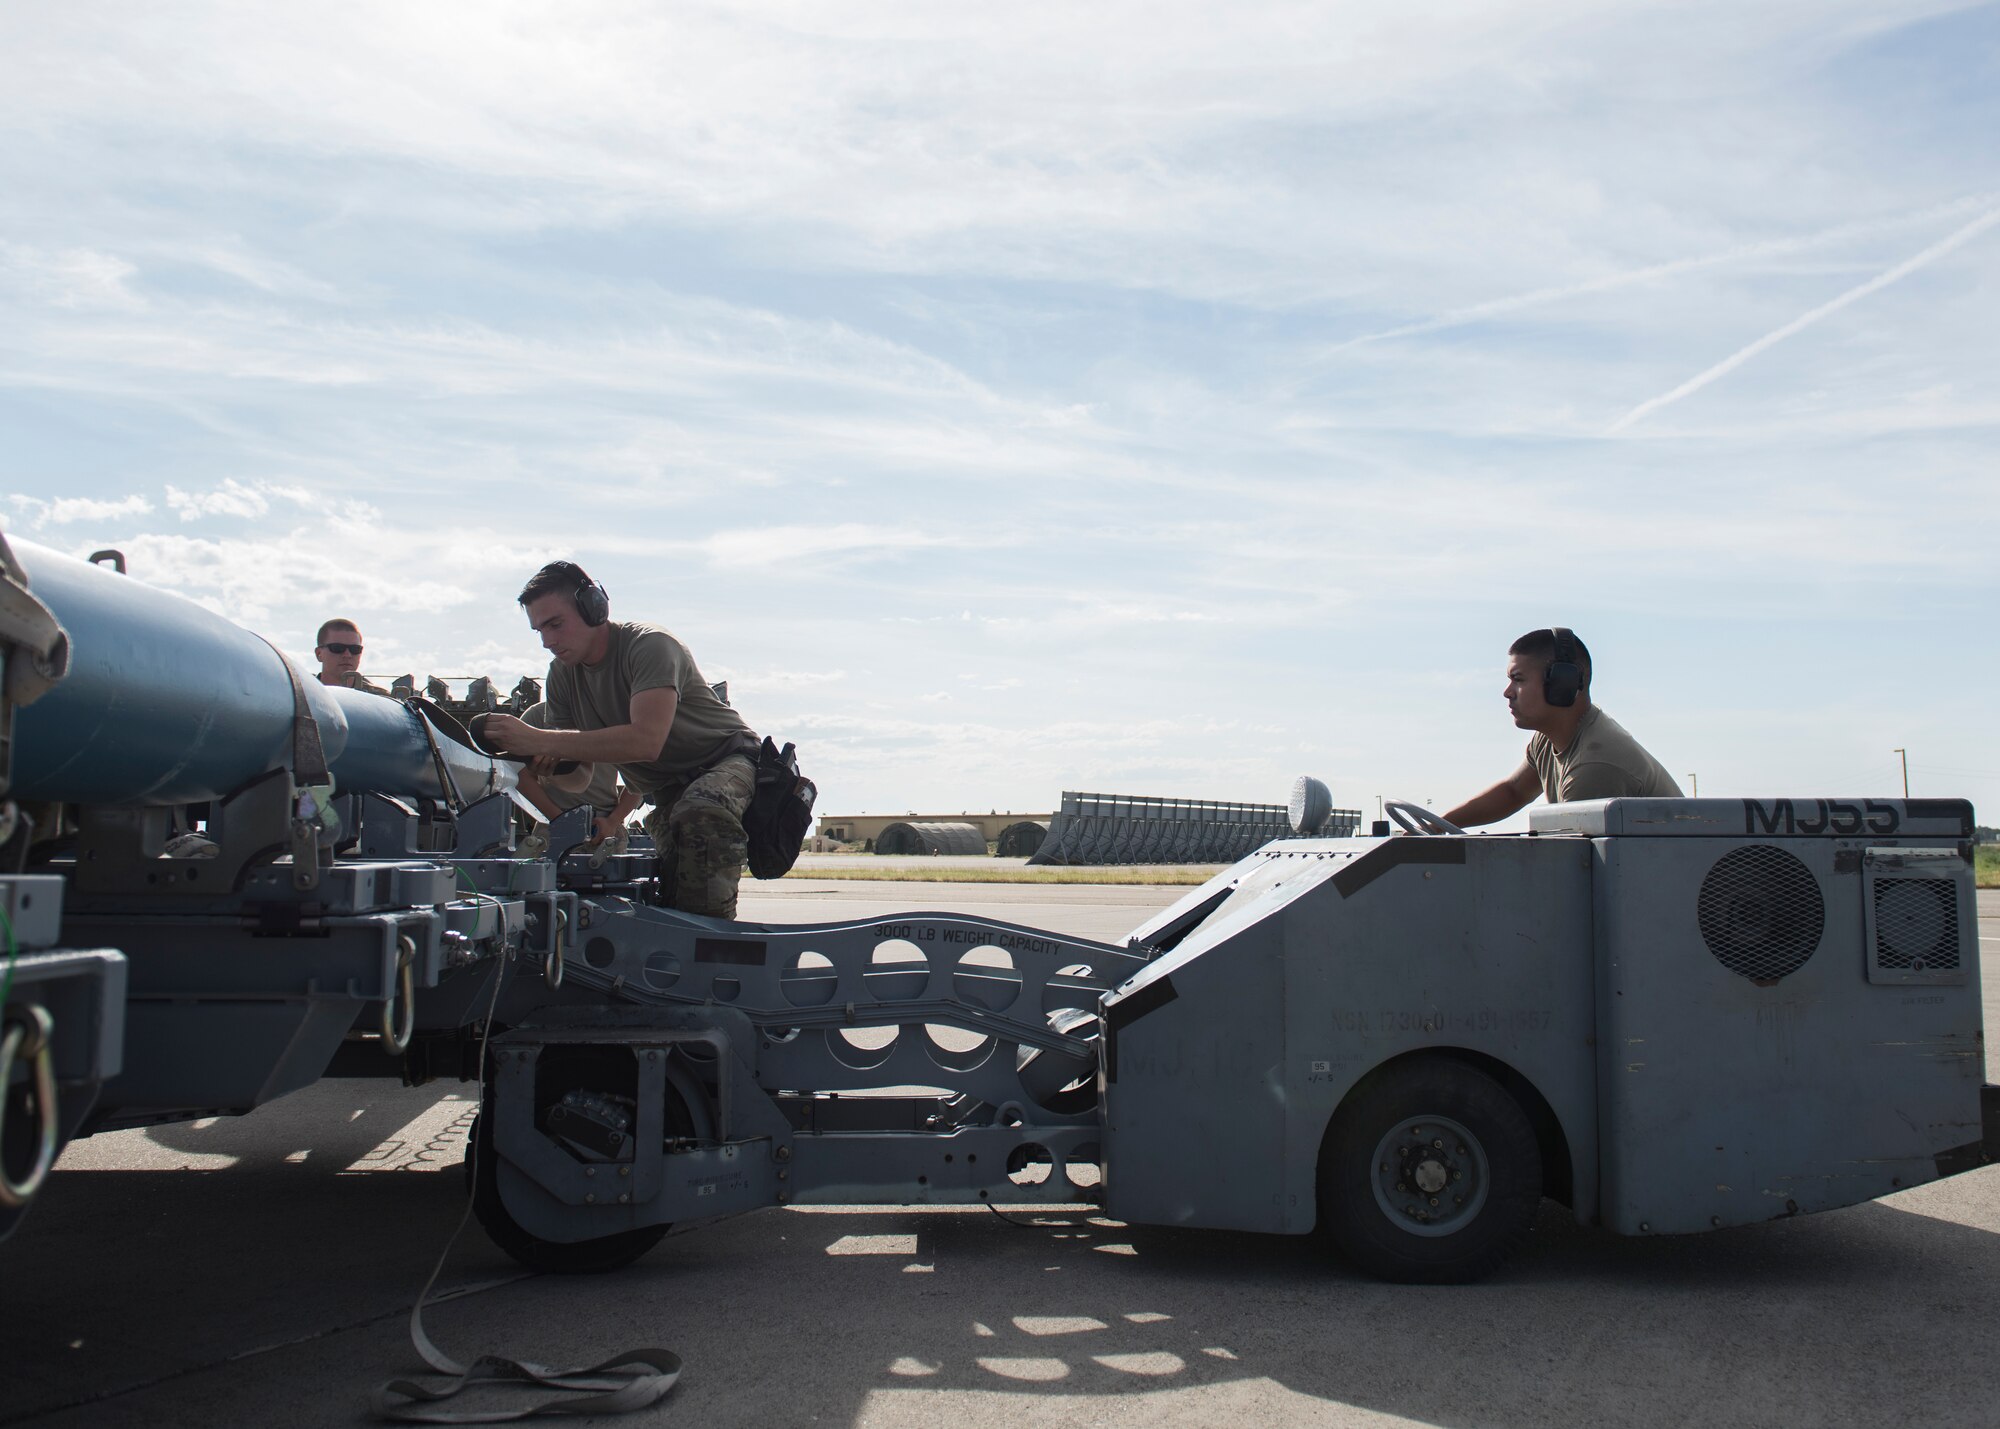 Staff Sgt. Timothy Chouinard, 391st Fighter Squadron, weapopns load crew chief, and Senior Airman Jonathan Castelan Medina, 391st FS, weapons load crew chief, prepare to load training equipment into an F-15E Strike Eagle during the Adaptive Basing exercise July 17, 2019, at Mountain Home Air Force Base. This training was done in order for the fighter squadrons to sharpen their Adaptive Basing strategies, enhancing it's potential down range. (U.S. Air Force photo by Senior Airman Tyrell Hall)